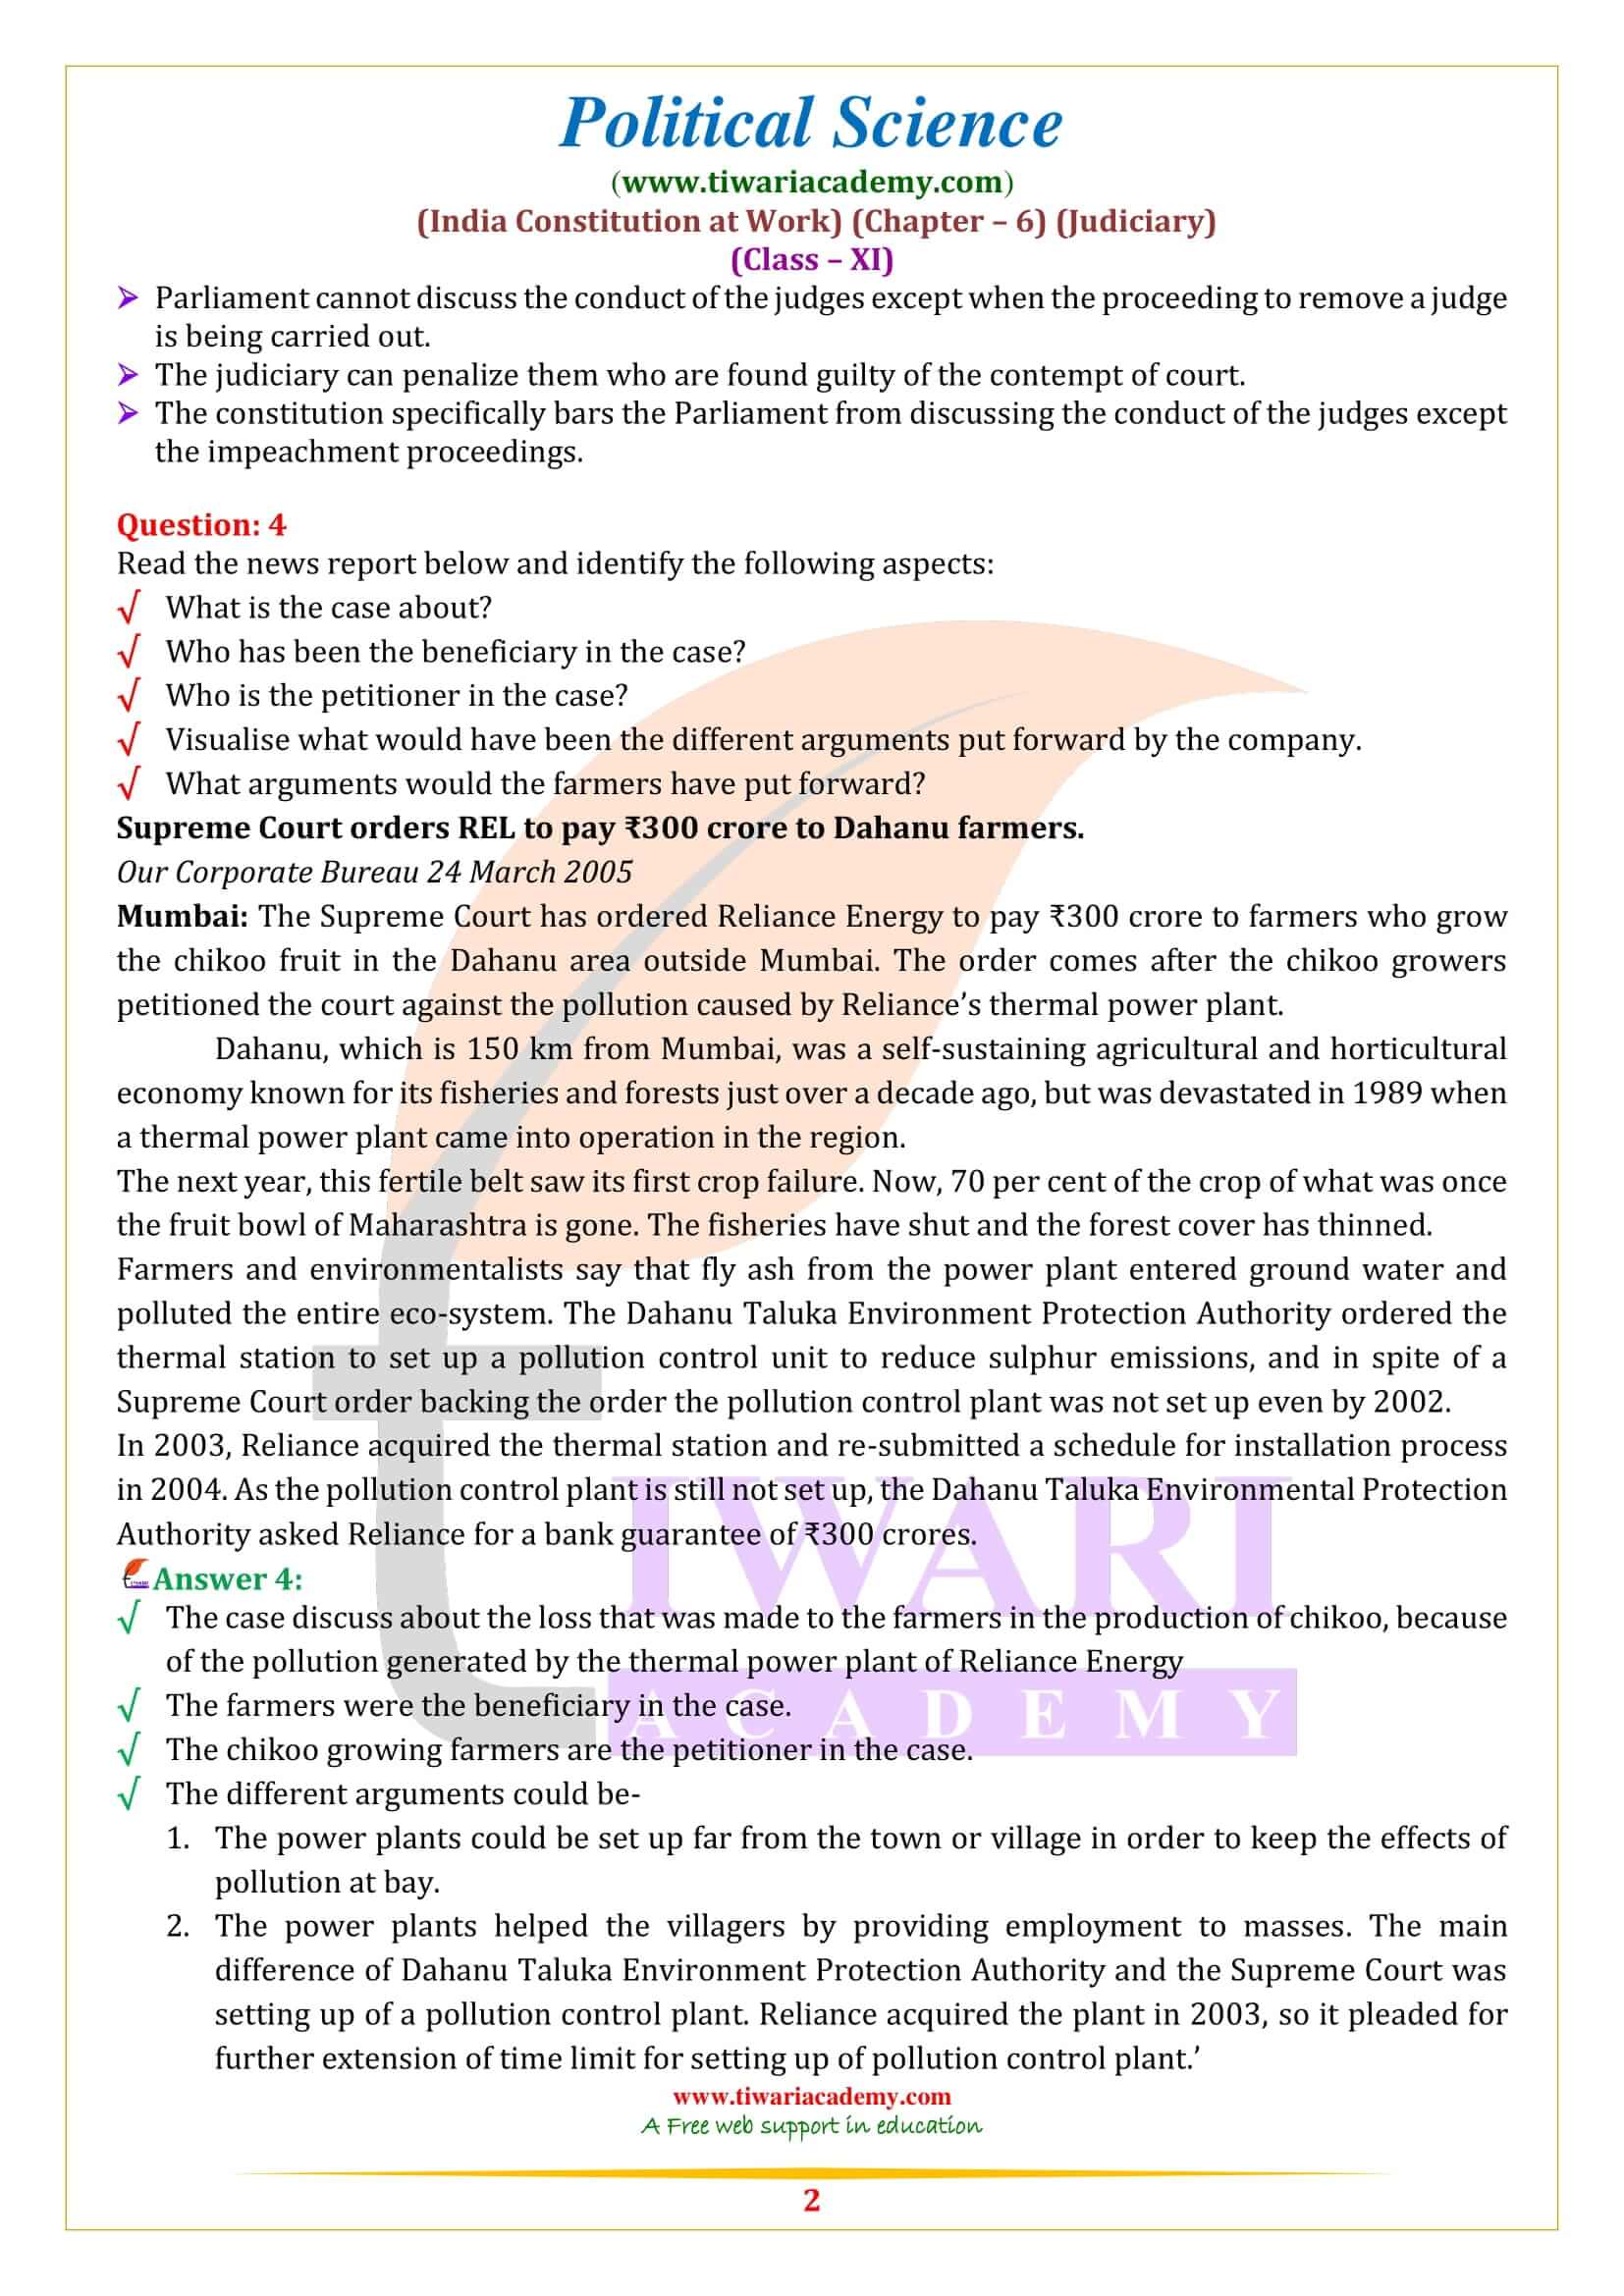 NCERT Solutions for Class 11 Political Science Chapter 6